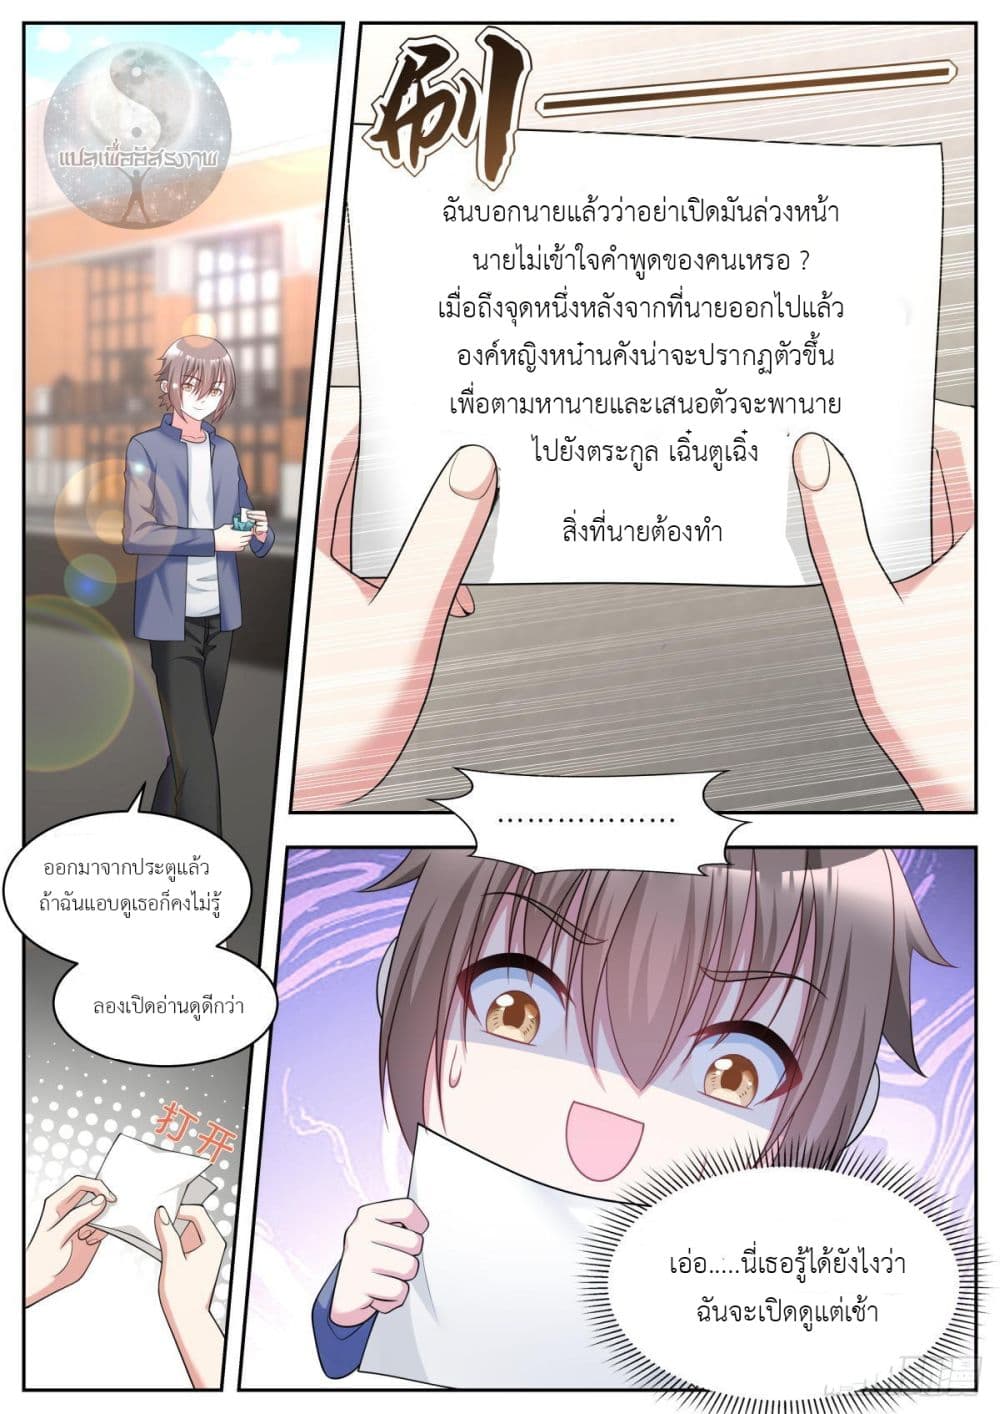 Miss, Something's Wrong With You สาวน้อยคุณคิดผิดแล้ว 36-36